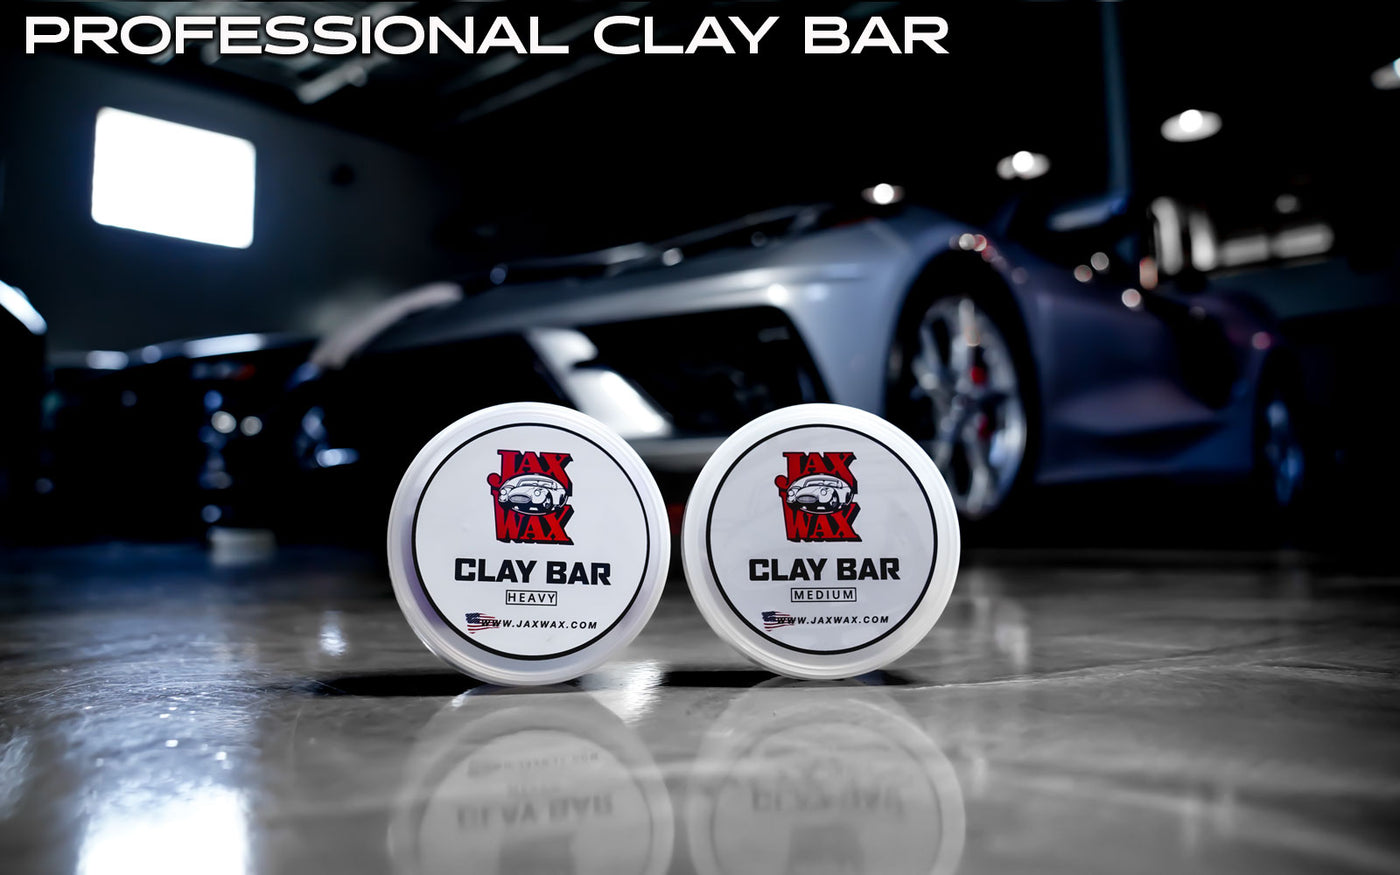 Nasca Clay Bar. All Nasca products available from Economic Motor